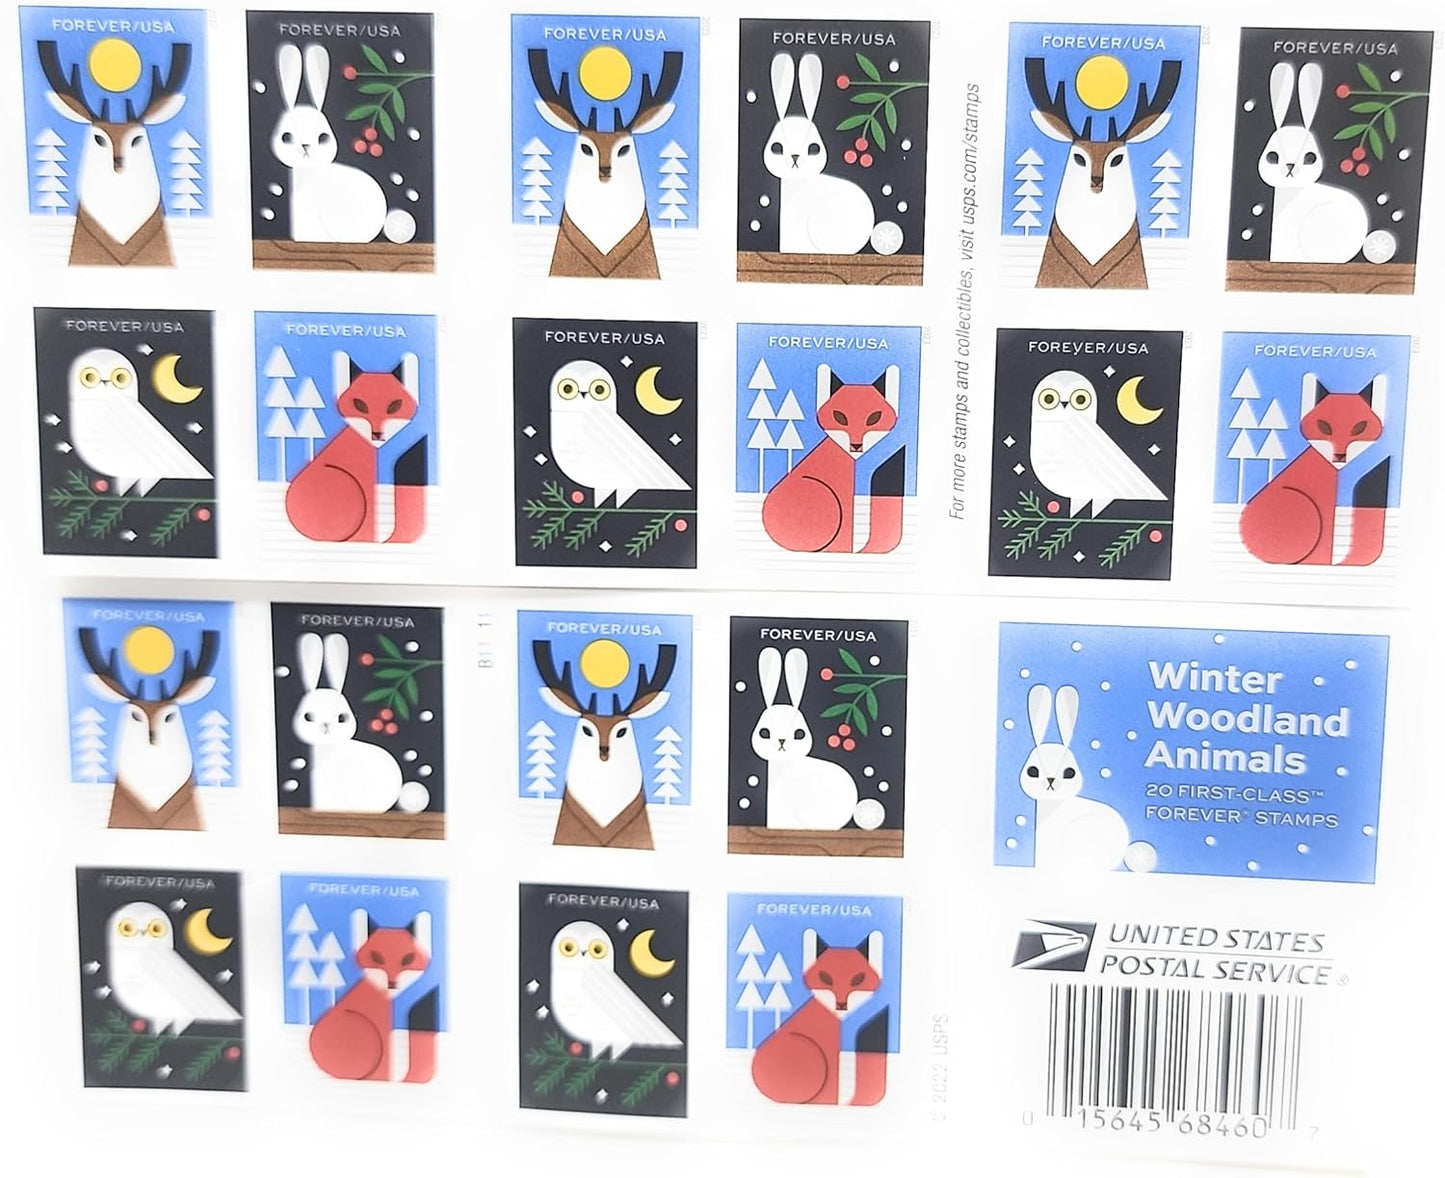 Winter Woodland Animals Forever Postage Stamps (a Deer, Fox, Rabbit, and Owl) 2023